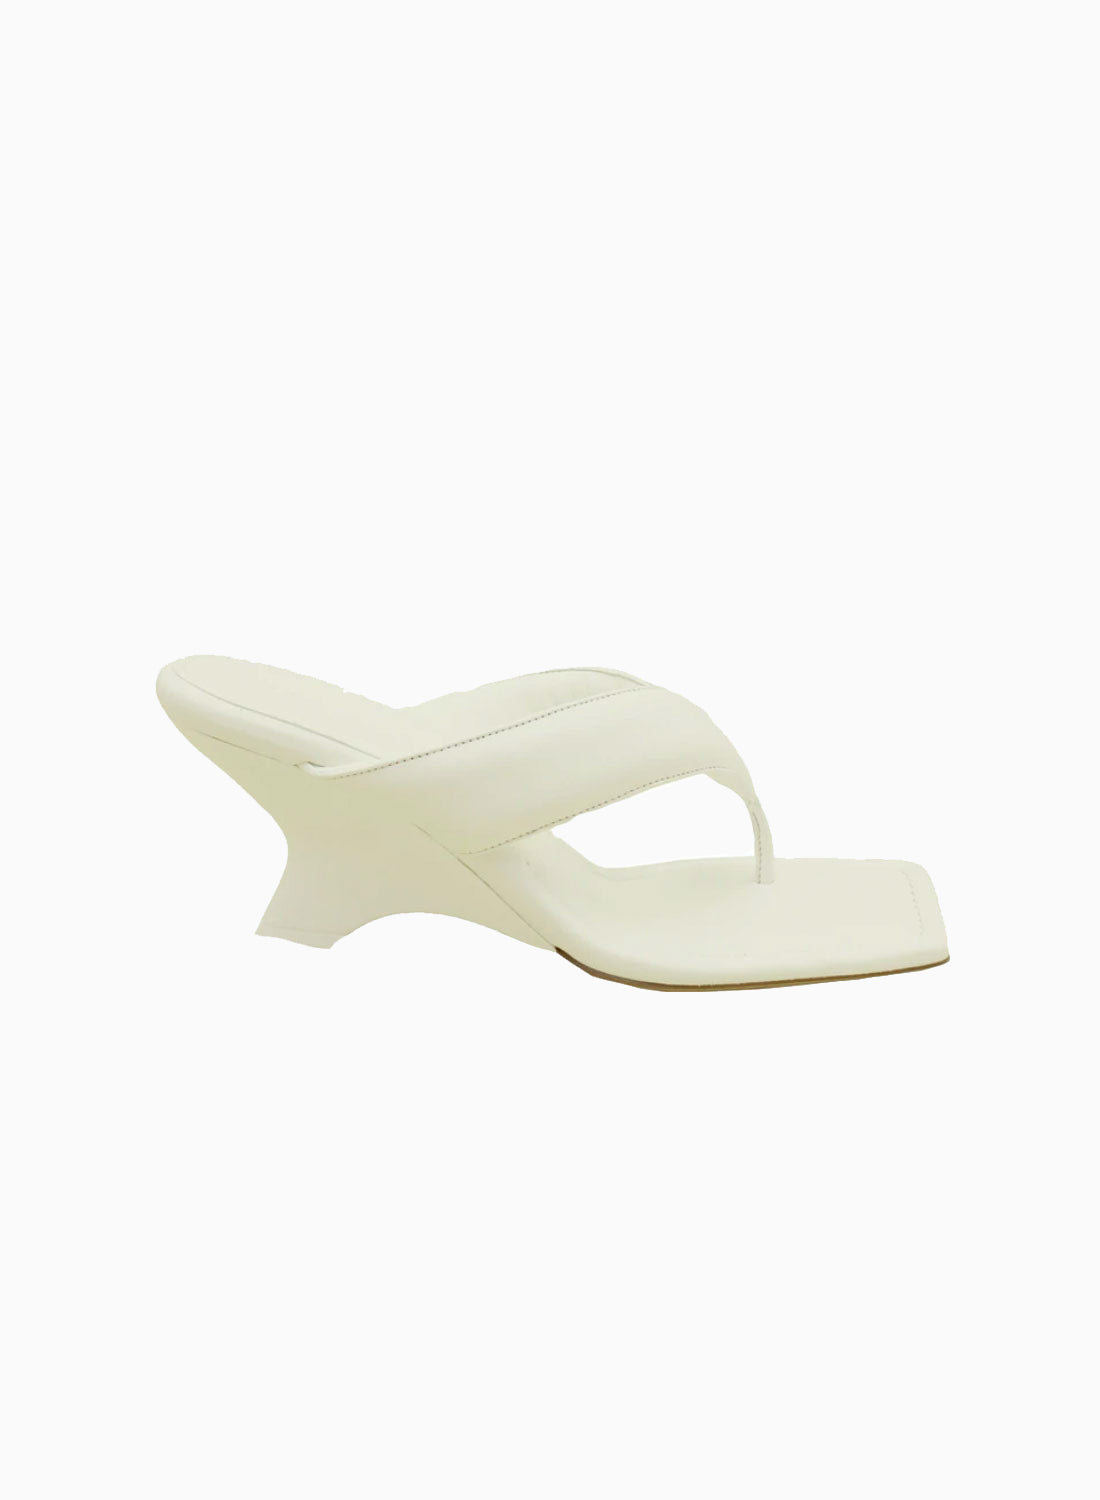 Giaborghini Gia 6 Puffy Thong Mule With Lacquered Wed Ivory